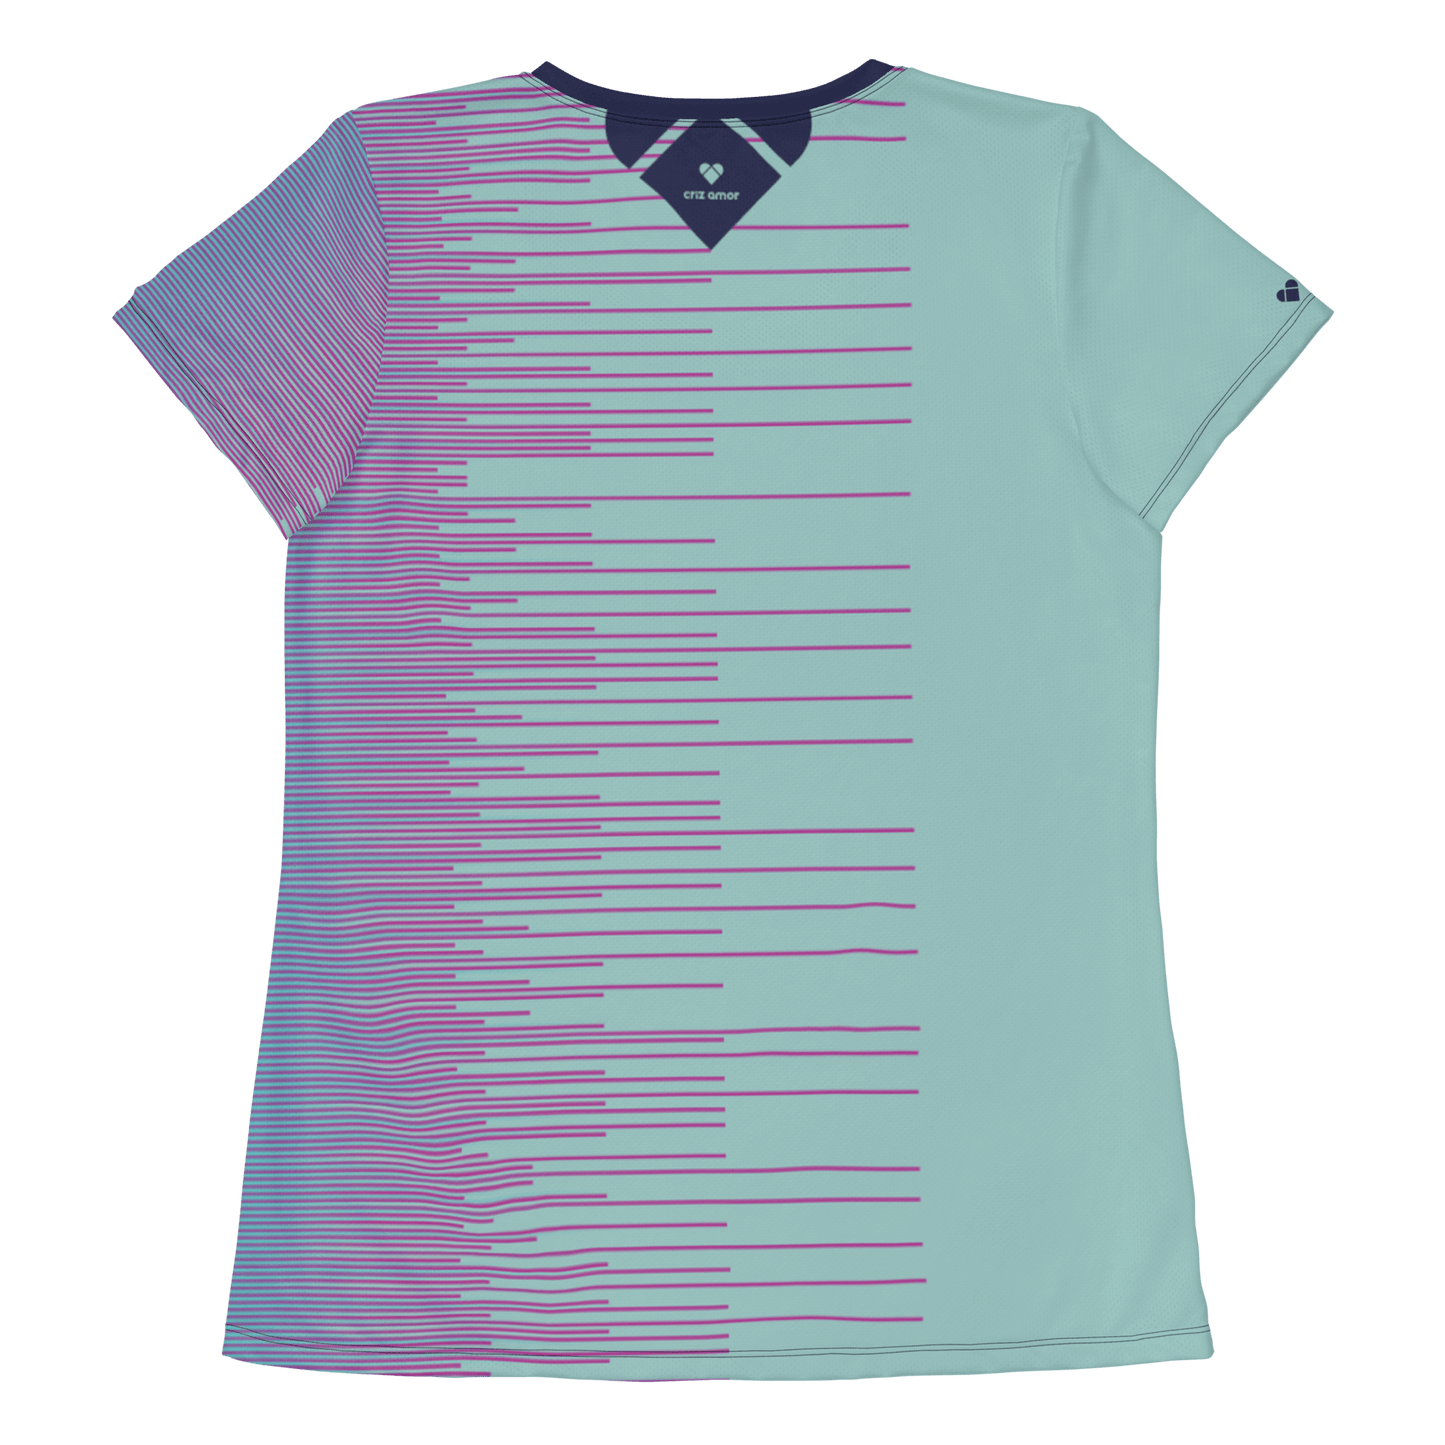 Mint Stripes Dual Sport Shirt with heart logo, a CRiZ AMOR exclusive for women